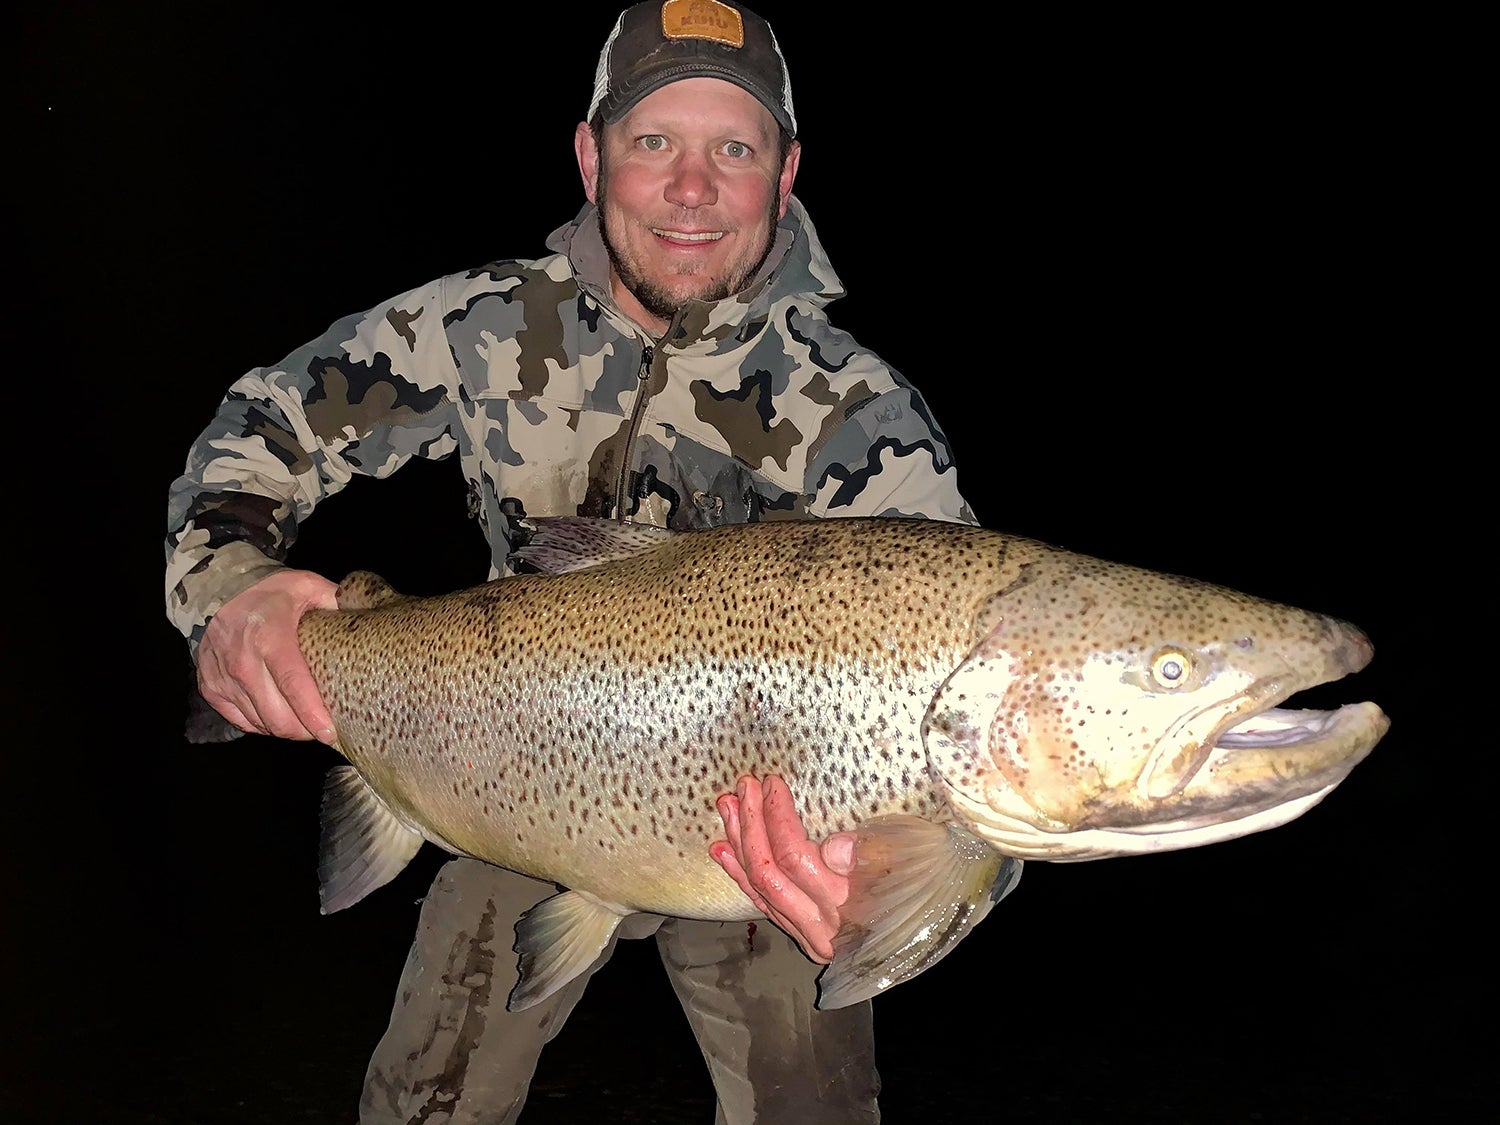 Fisherman Catches New Record Brown Trout with a 32-Plus-Pounder!